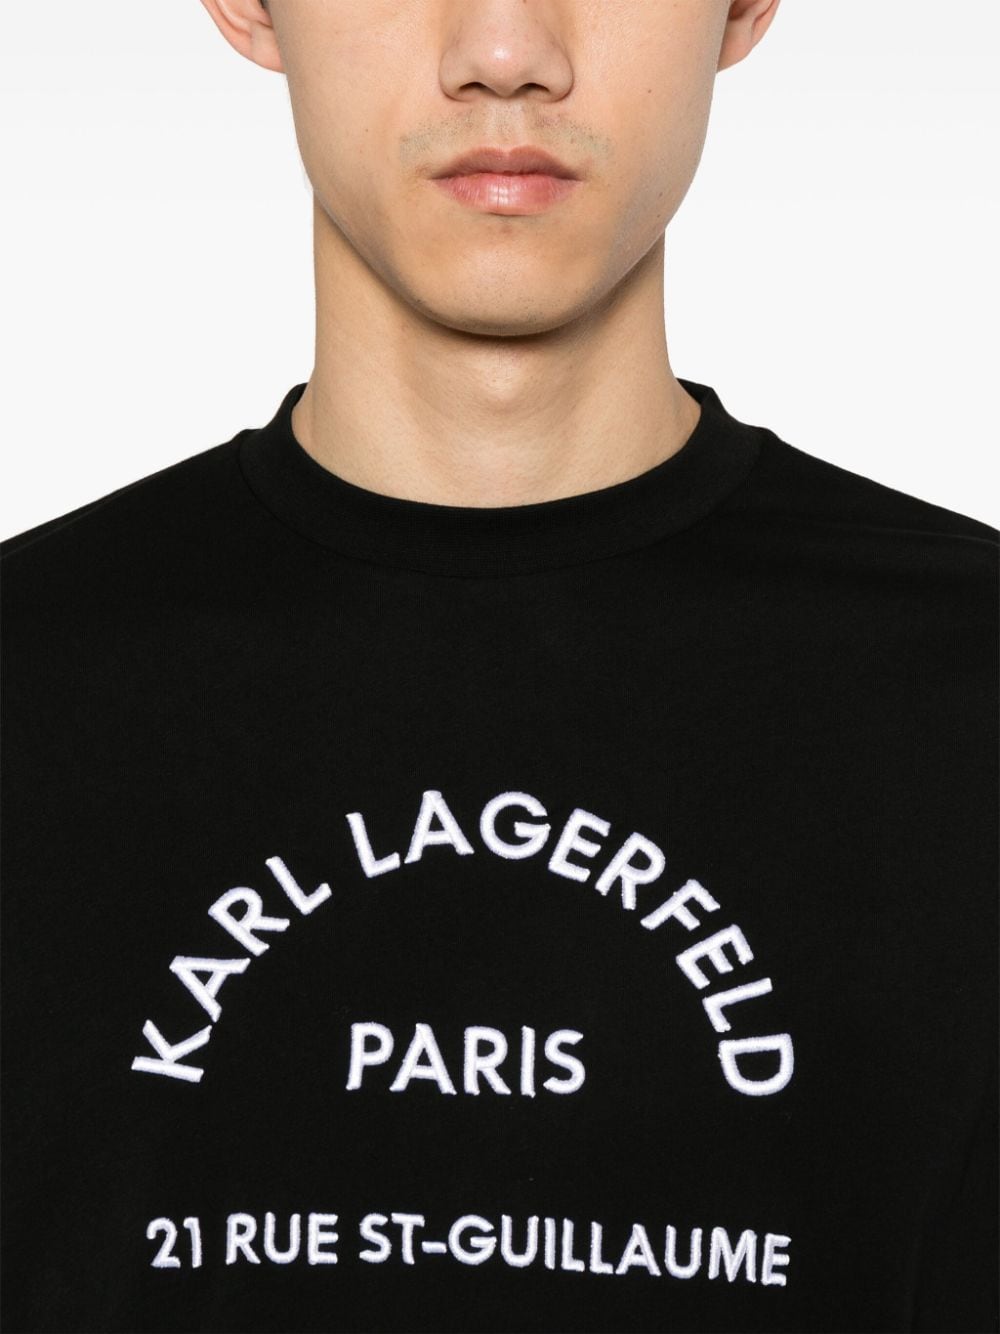 Karl Lagerfeld KARL LAGERFELD- T-shirt With Lettering